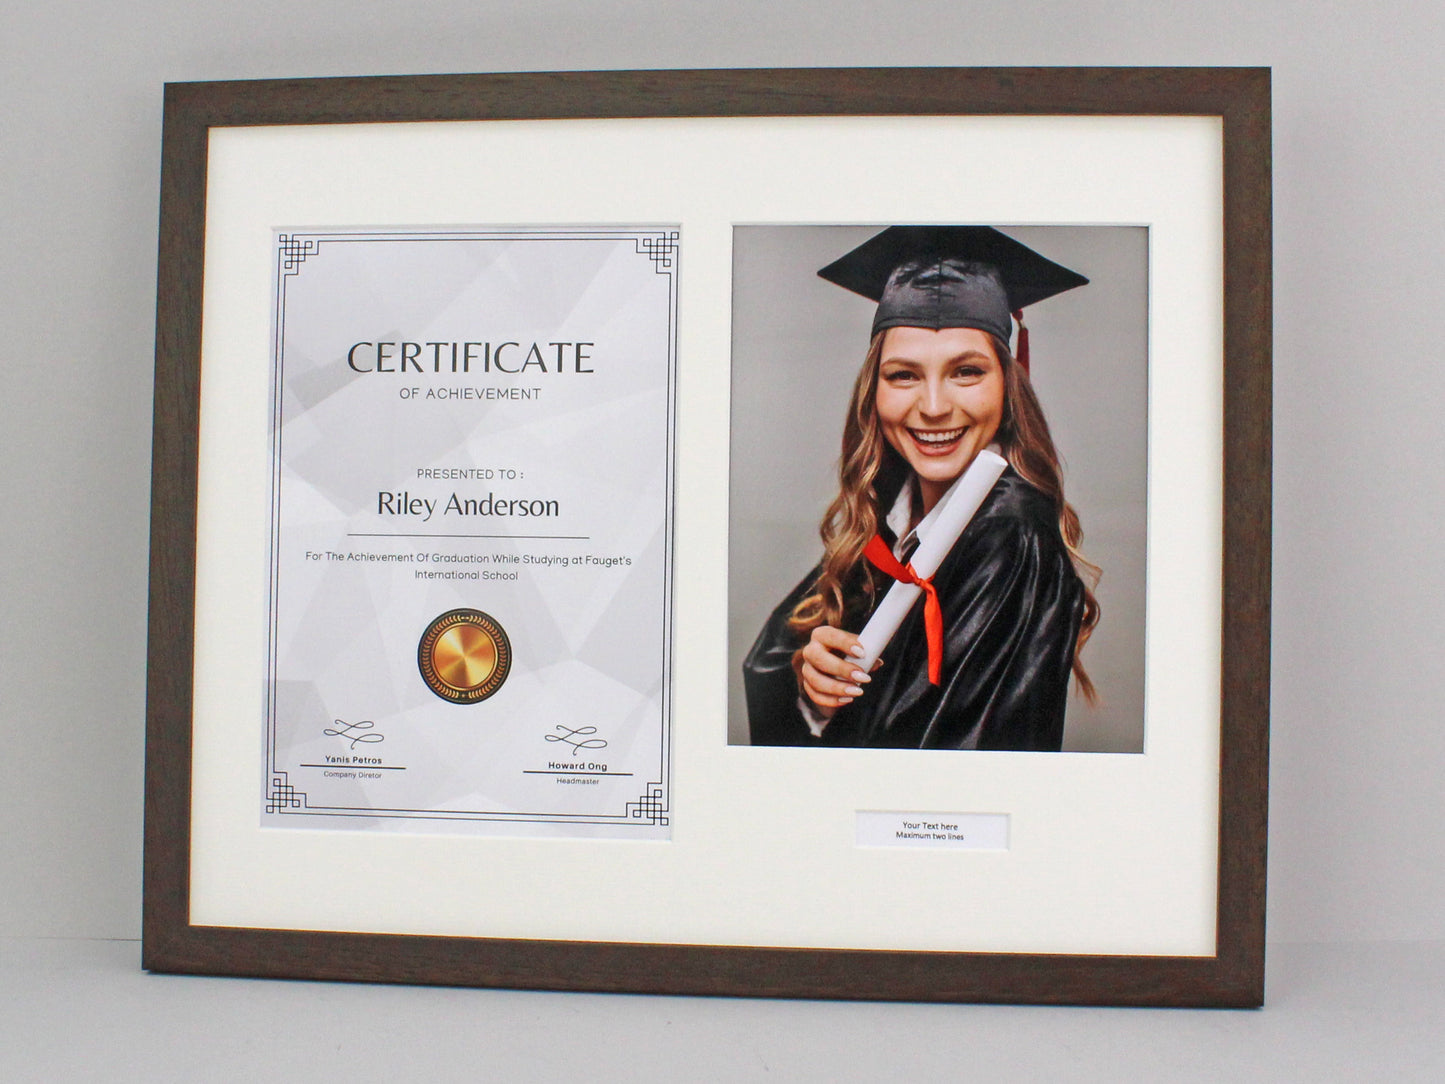 Personalised Certificate, Graduation, Diploma Frame with Photo. Suits an A4 Sized Certificate/image and a 10x8" Photo.